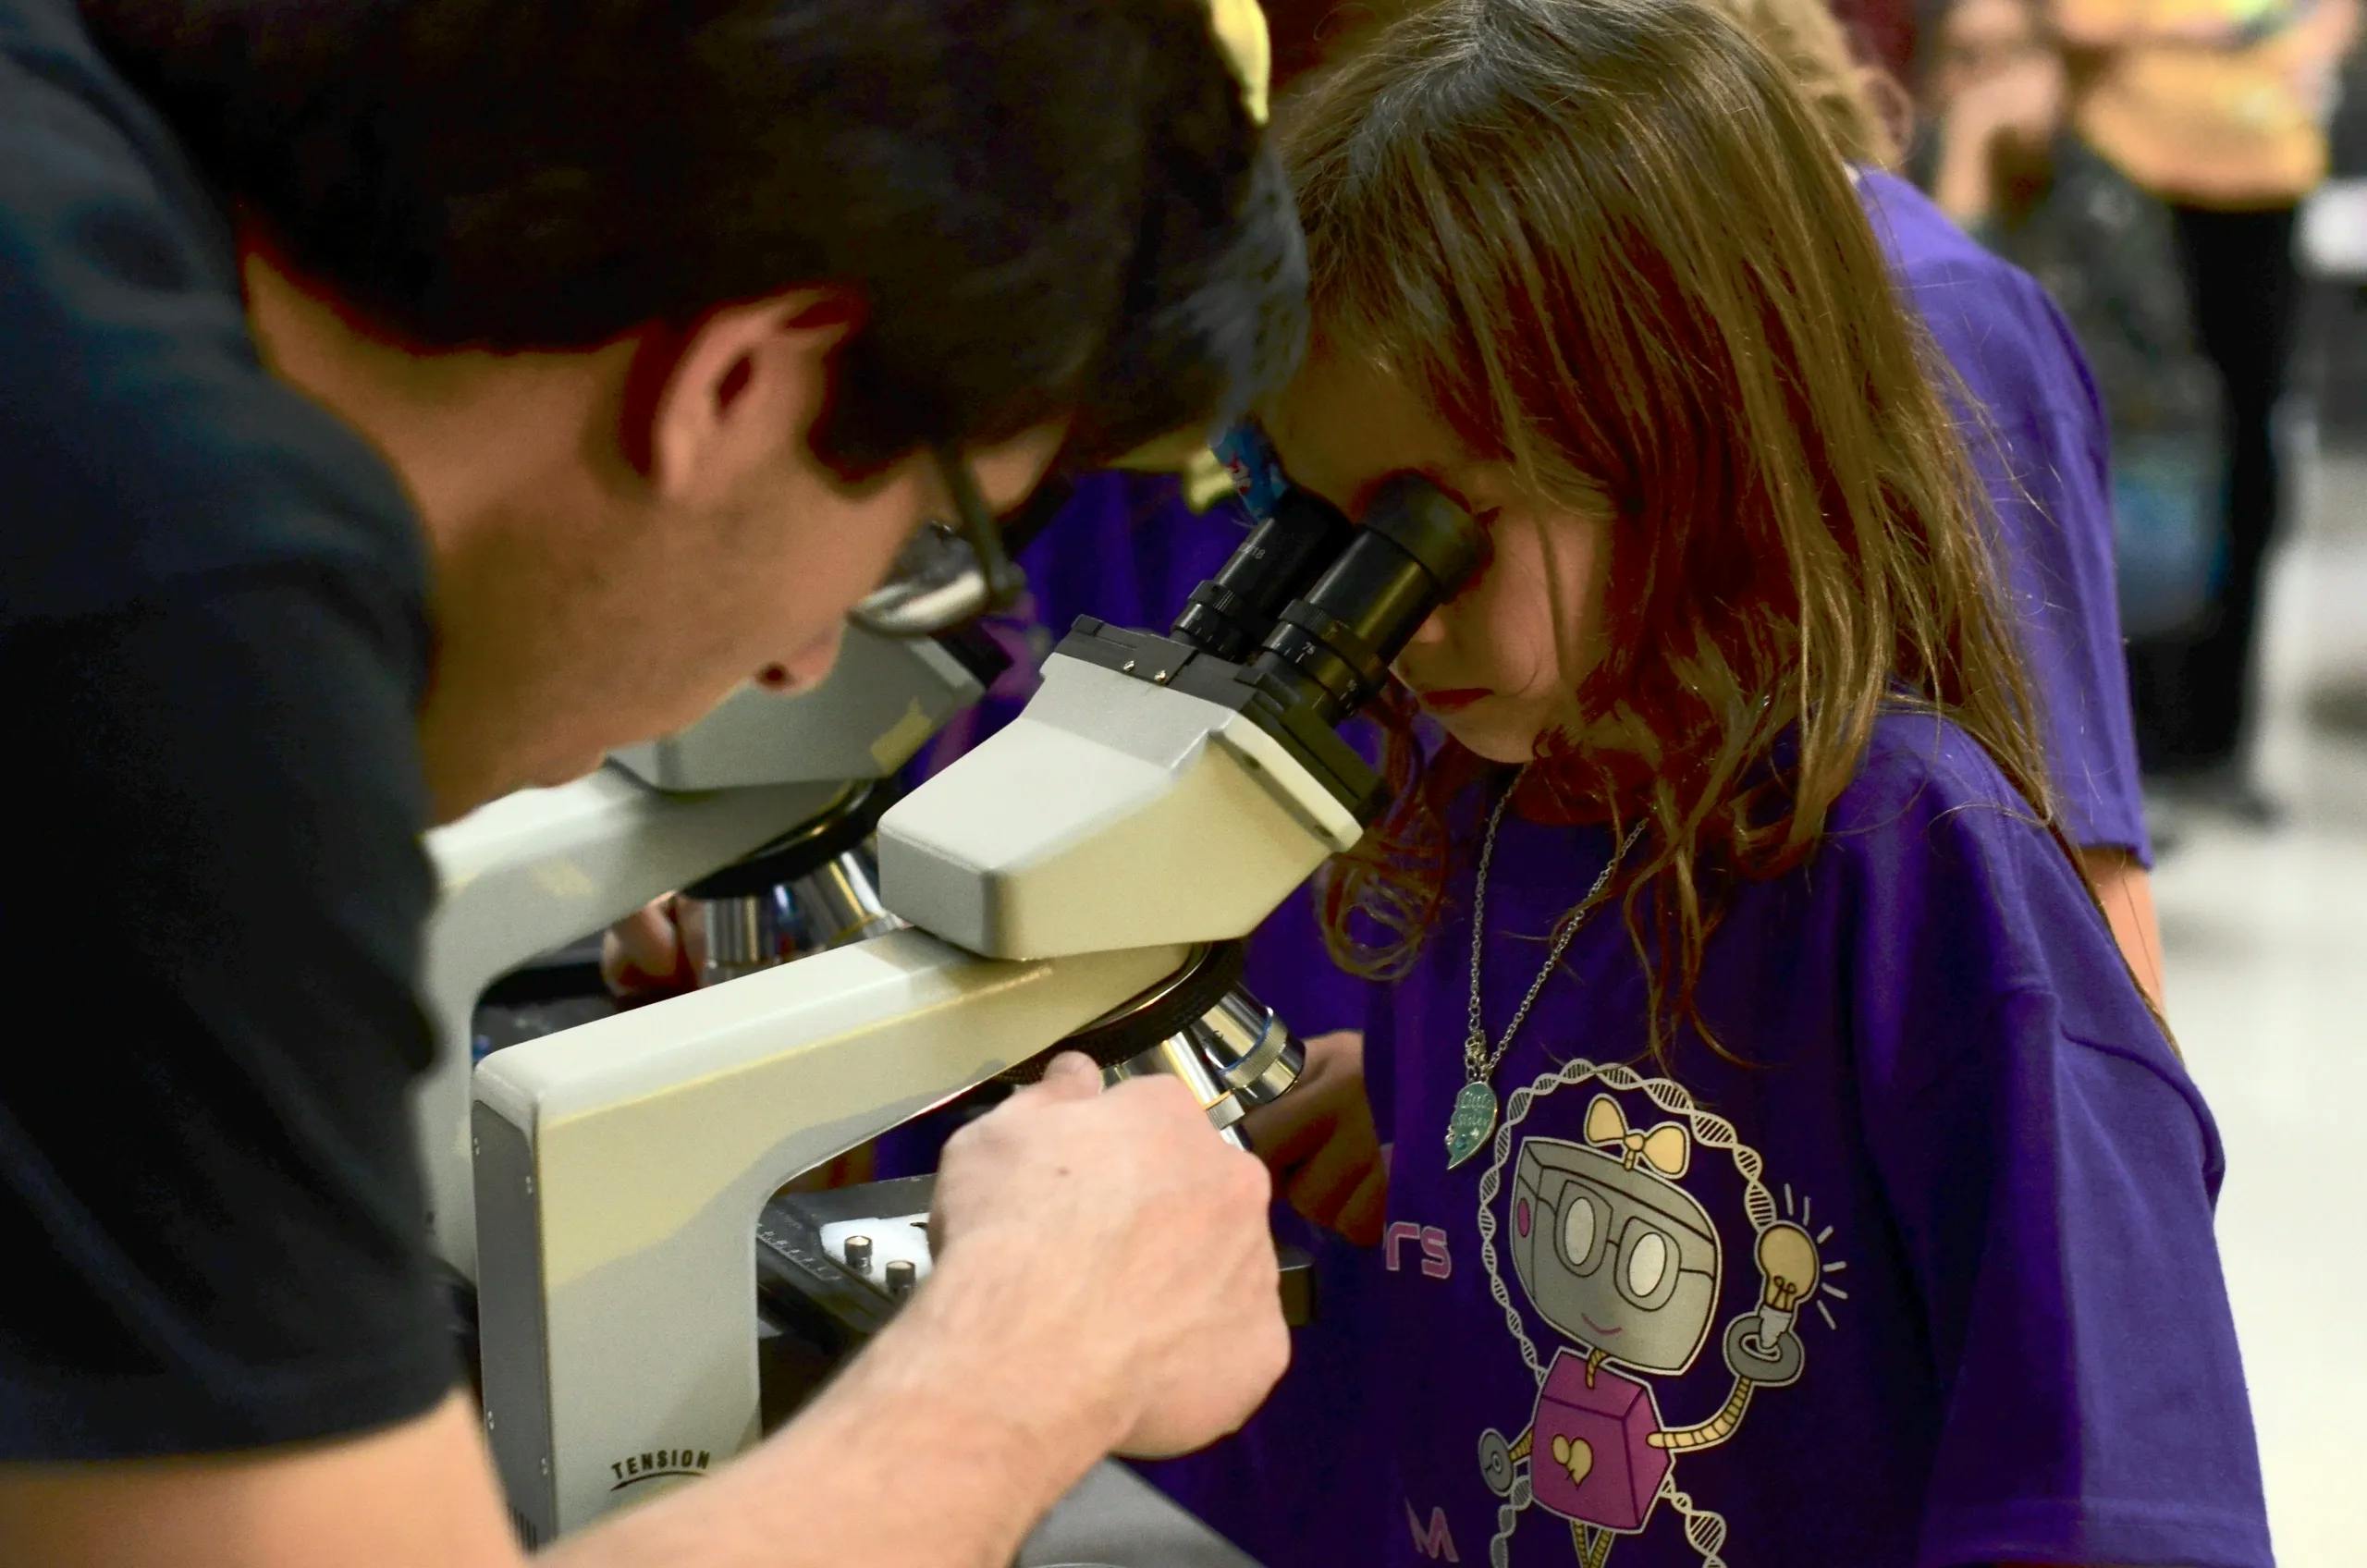 Young girl looking through microscope during an experiment at a SiS event